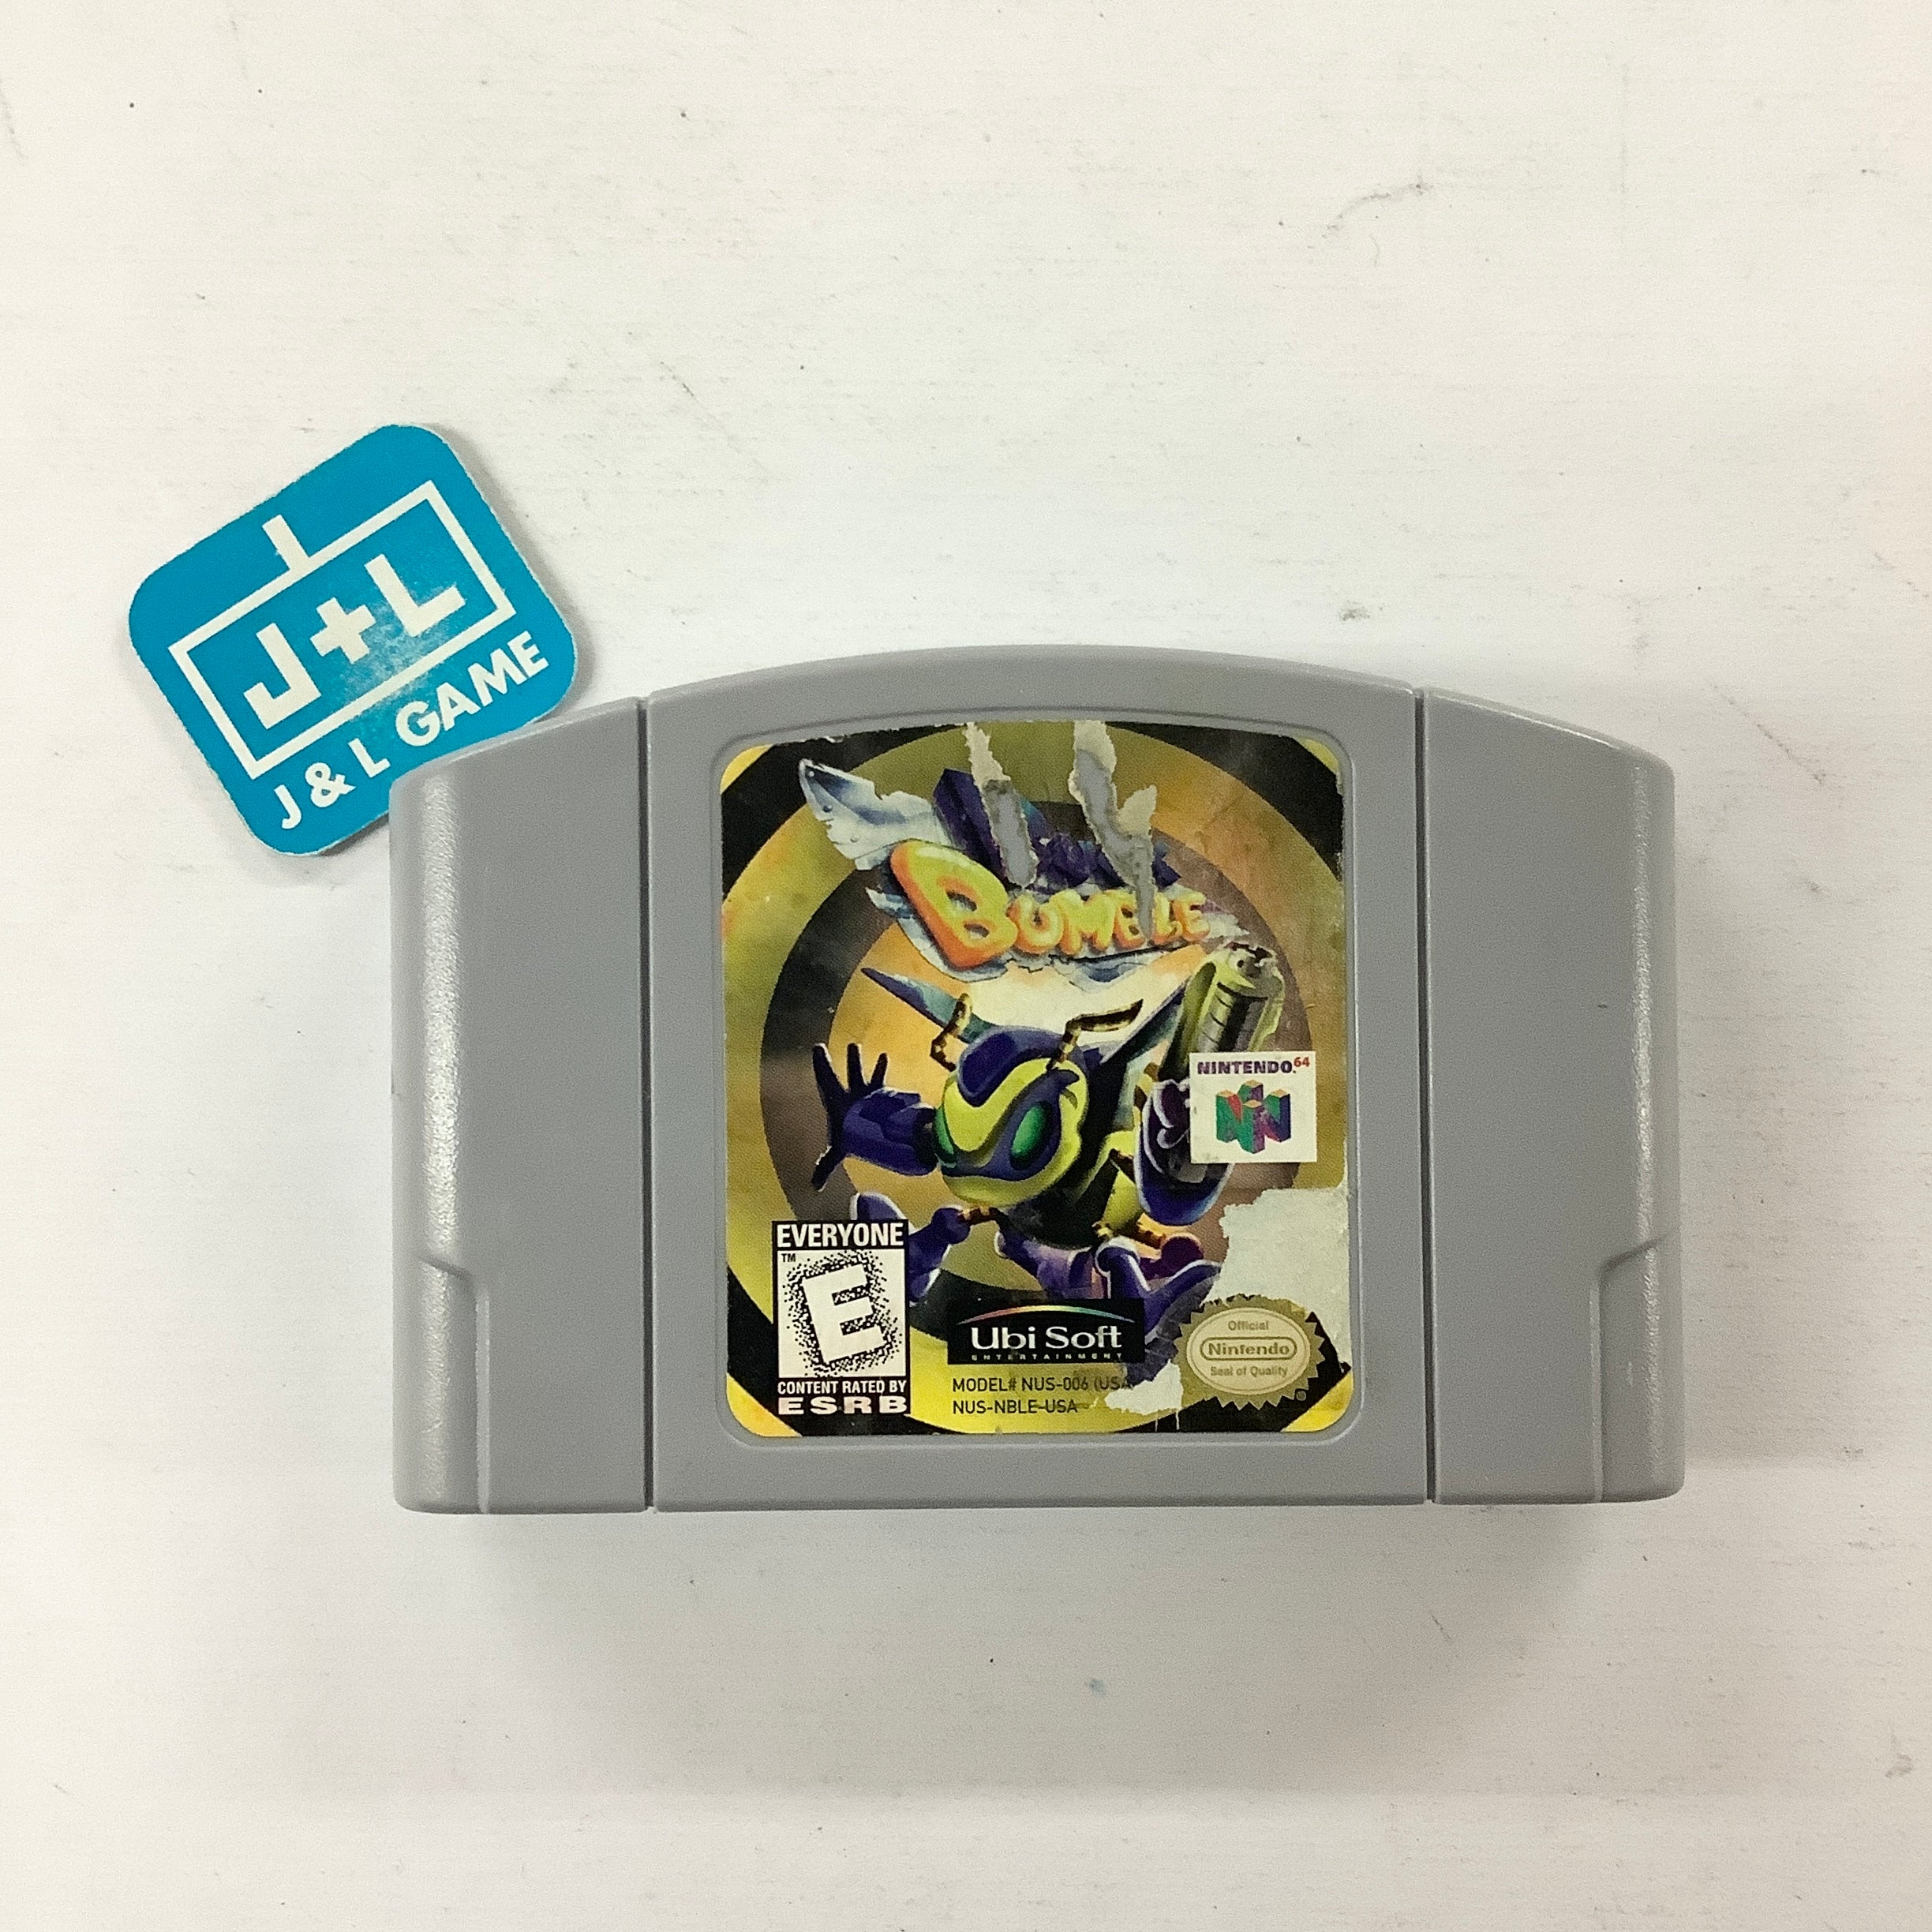 Buck Bumble - (N64) Nintendo 64 [Pre-Owned] Video Games Ubisoft   